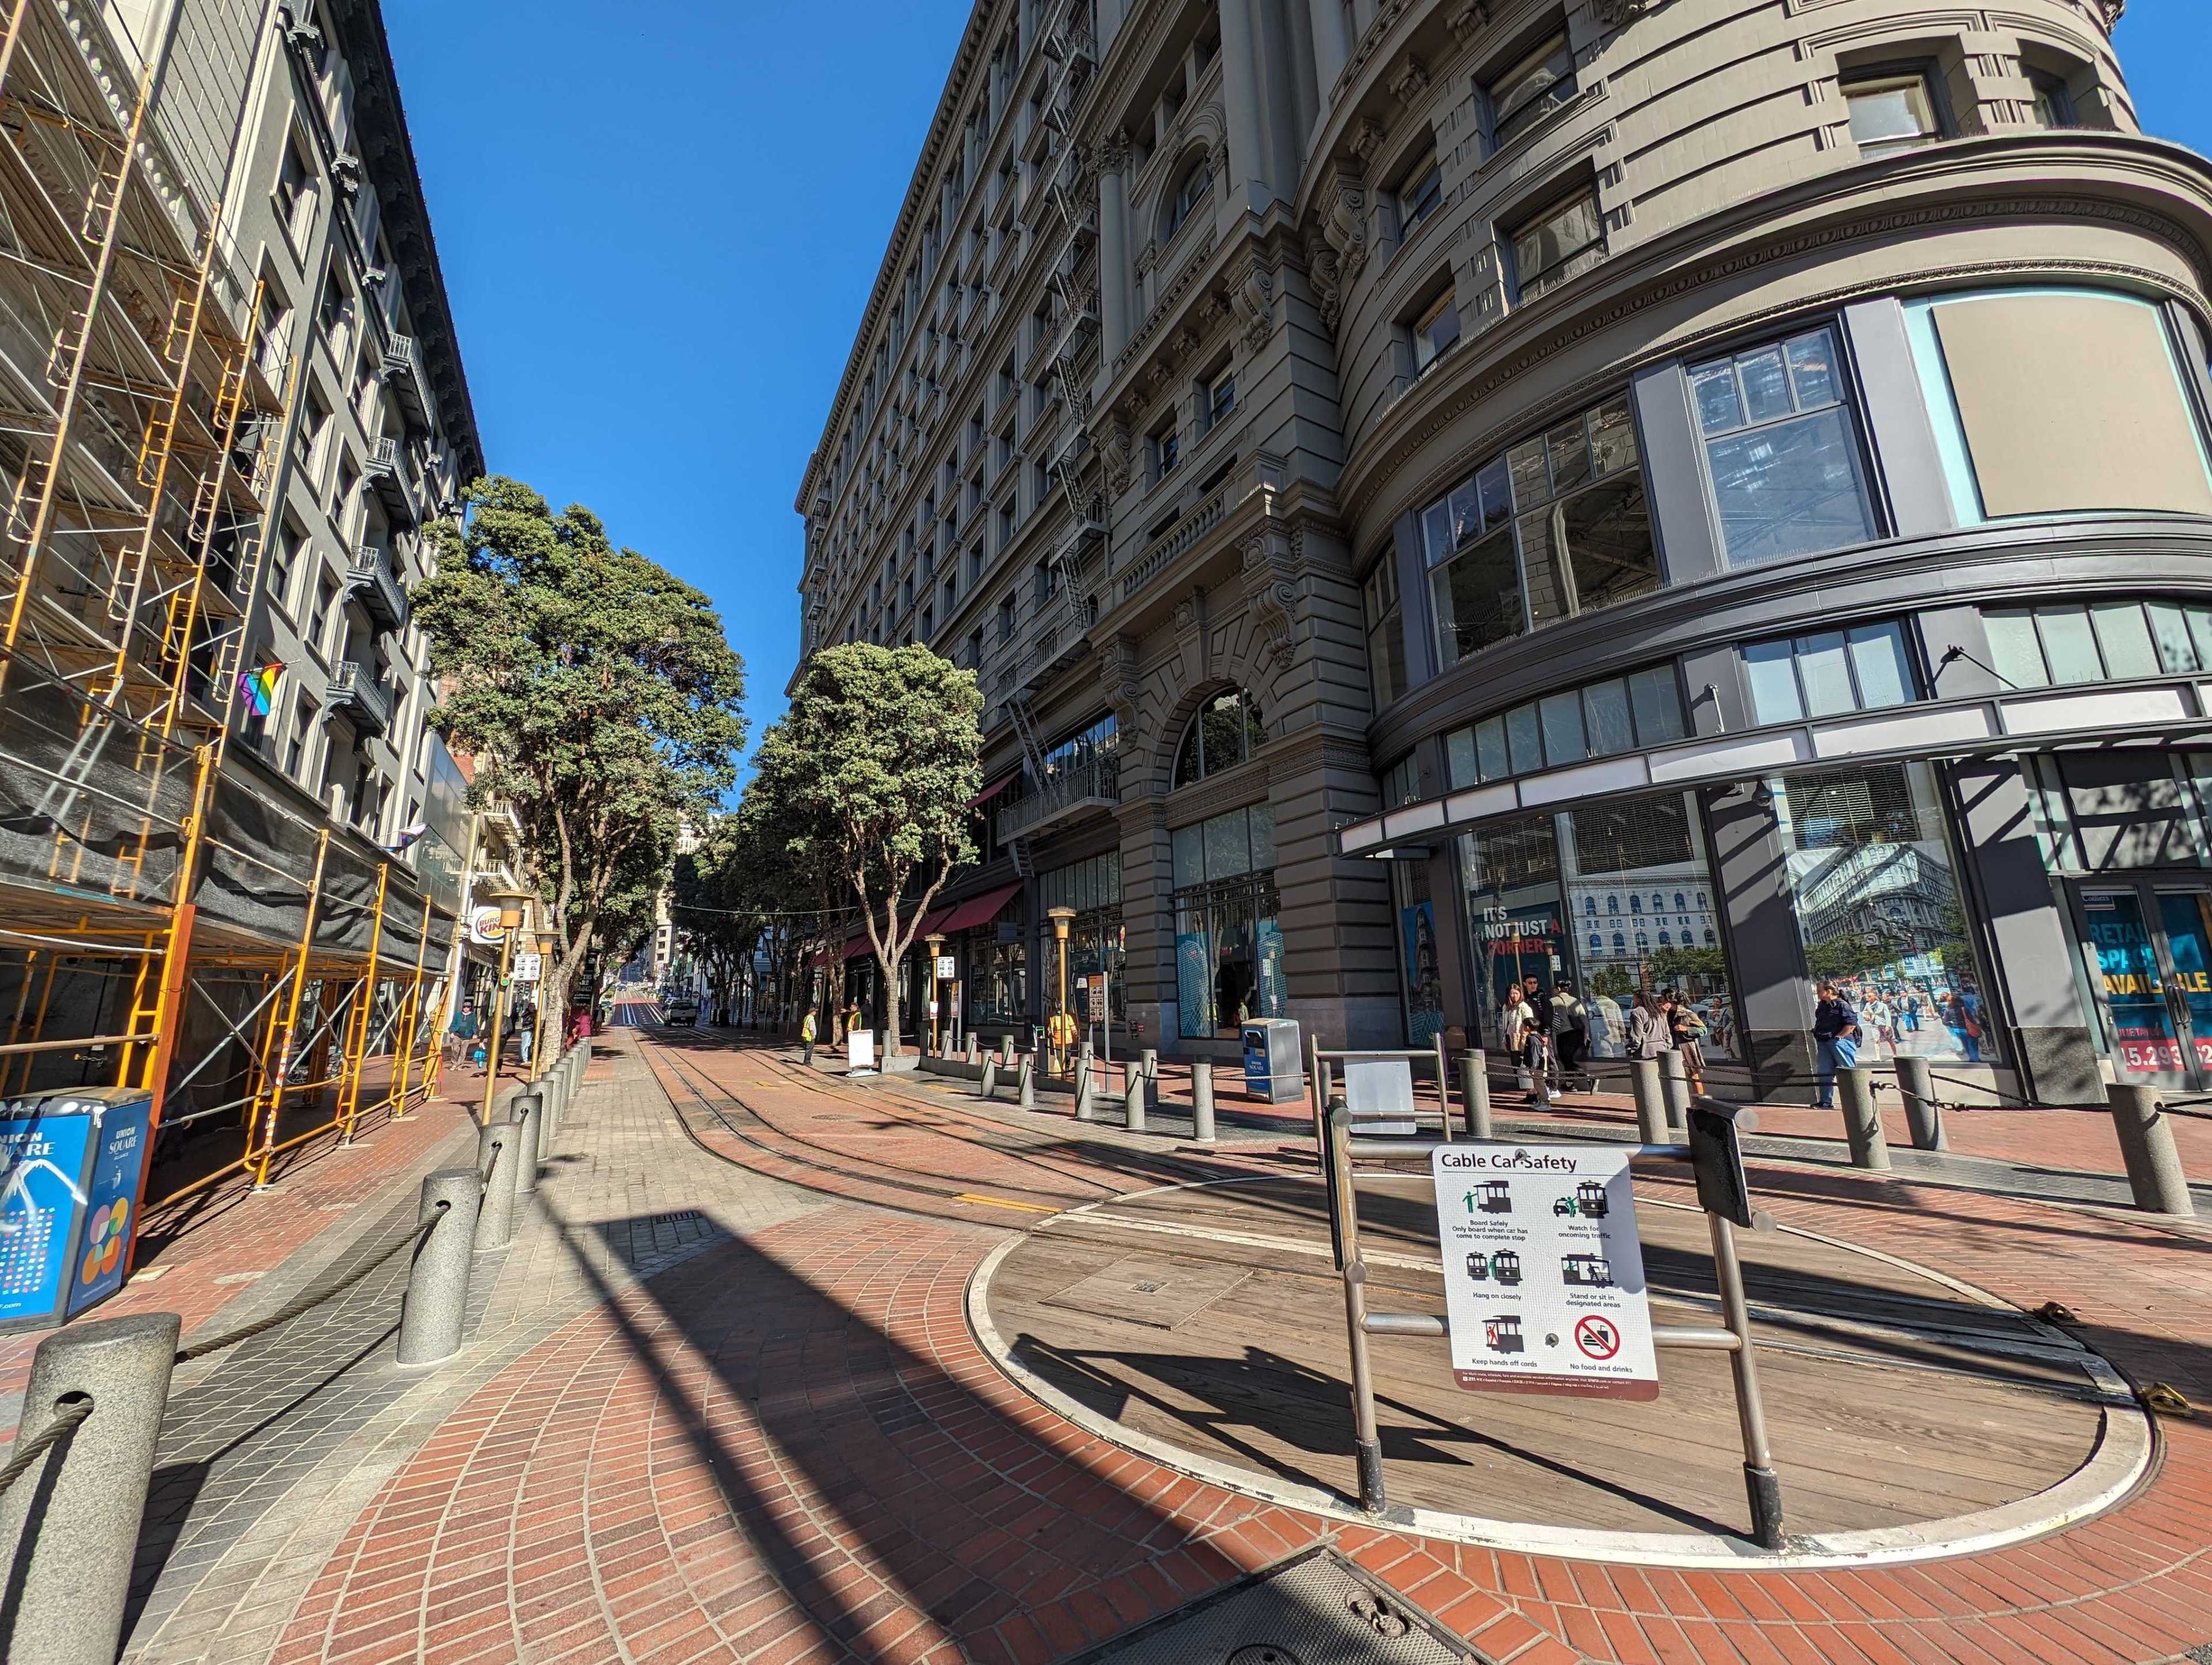 The cable car turnaround at Market and Powell streets in San Francisco was empty due to APEC security restrictions. 